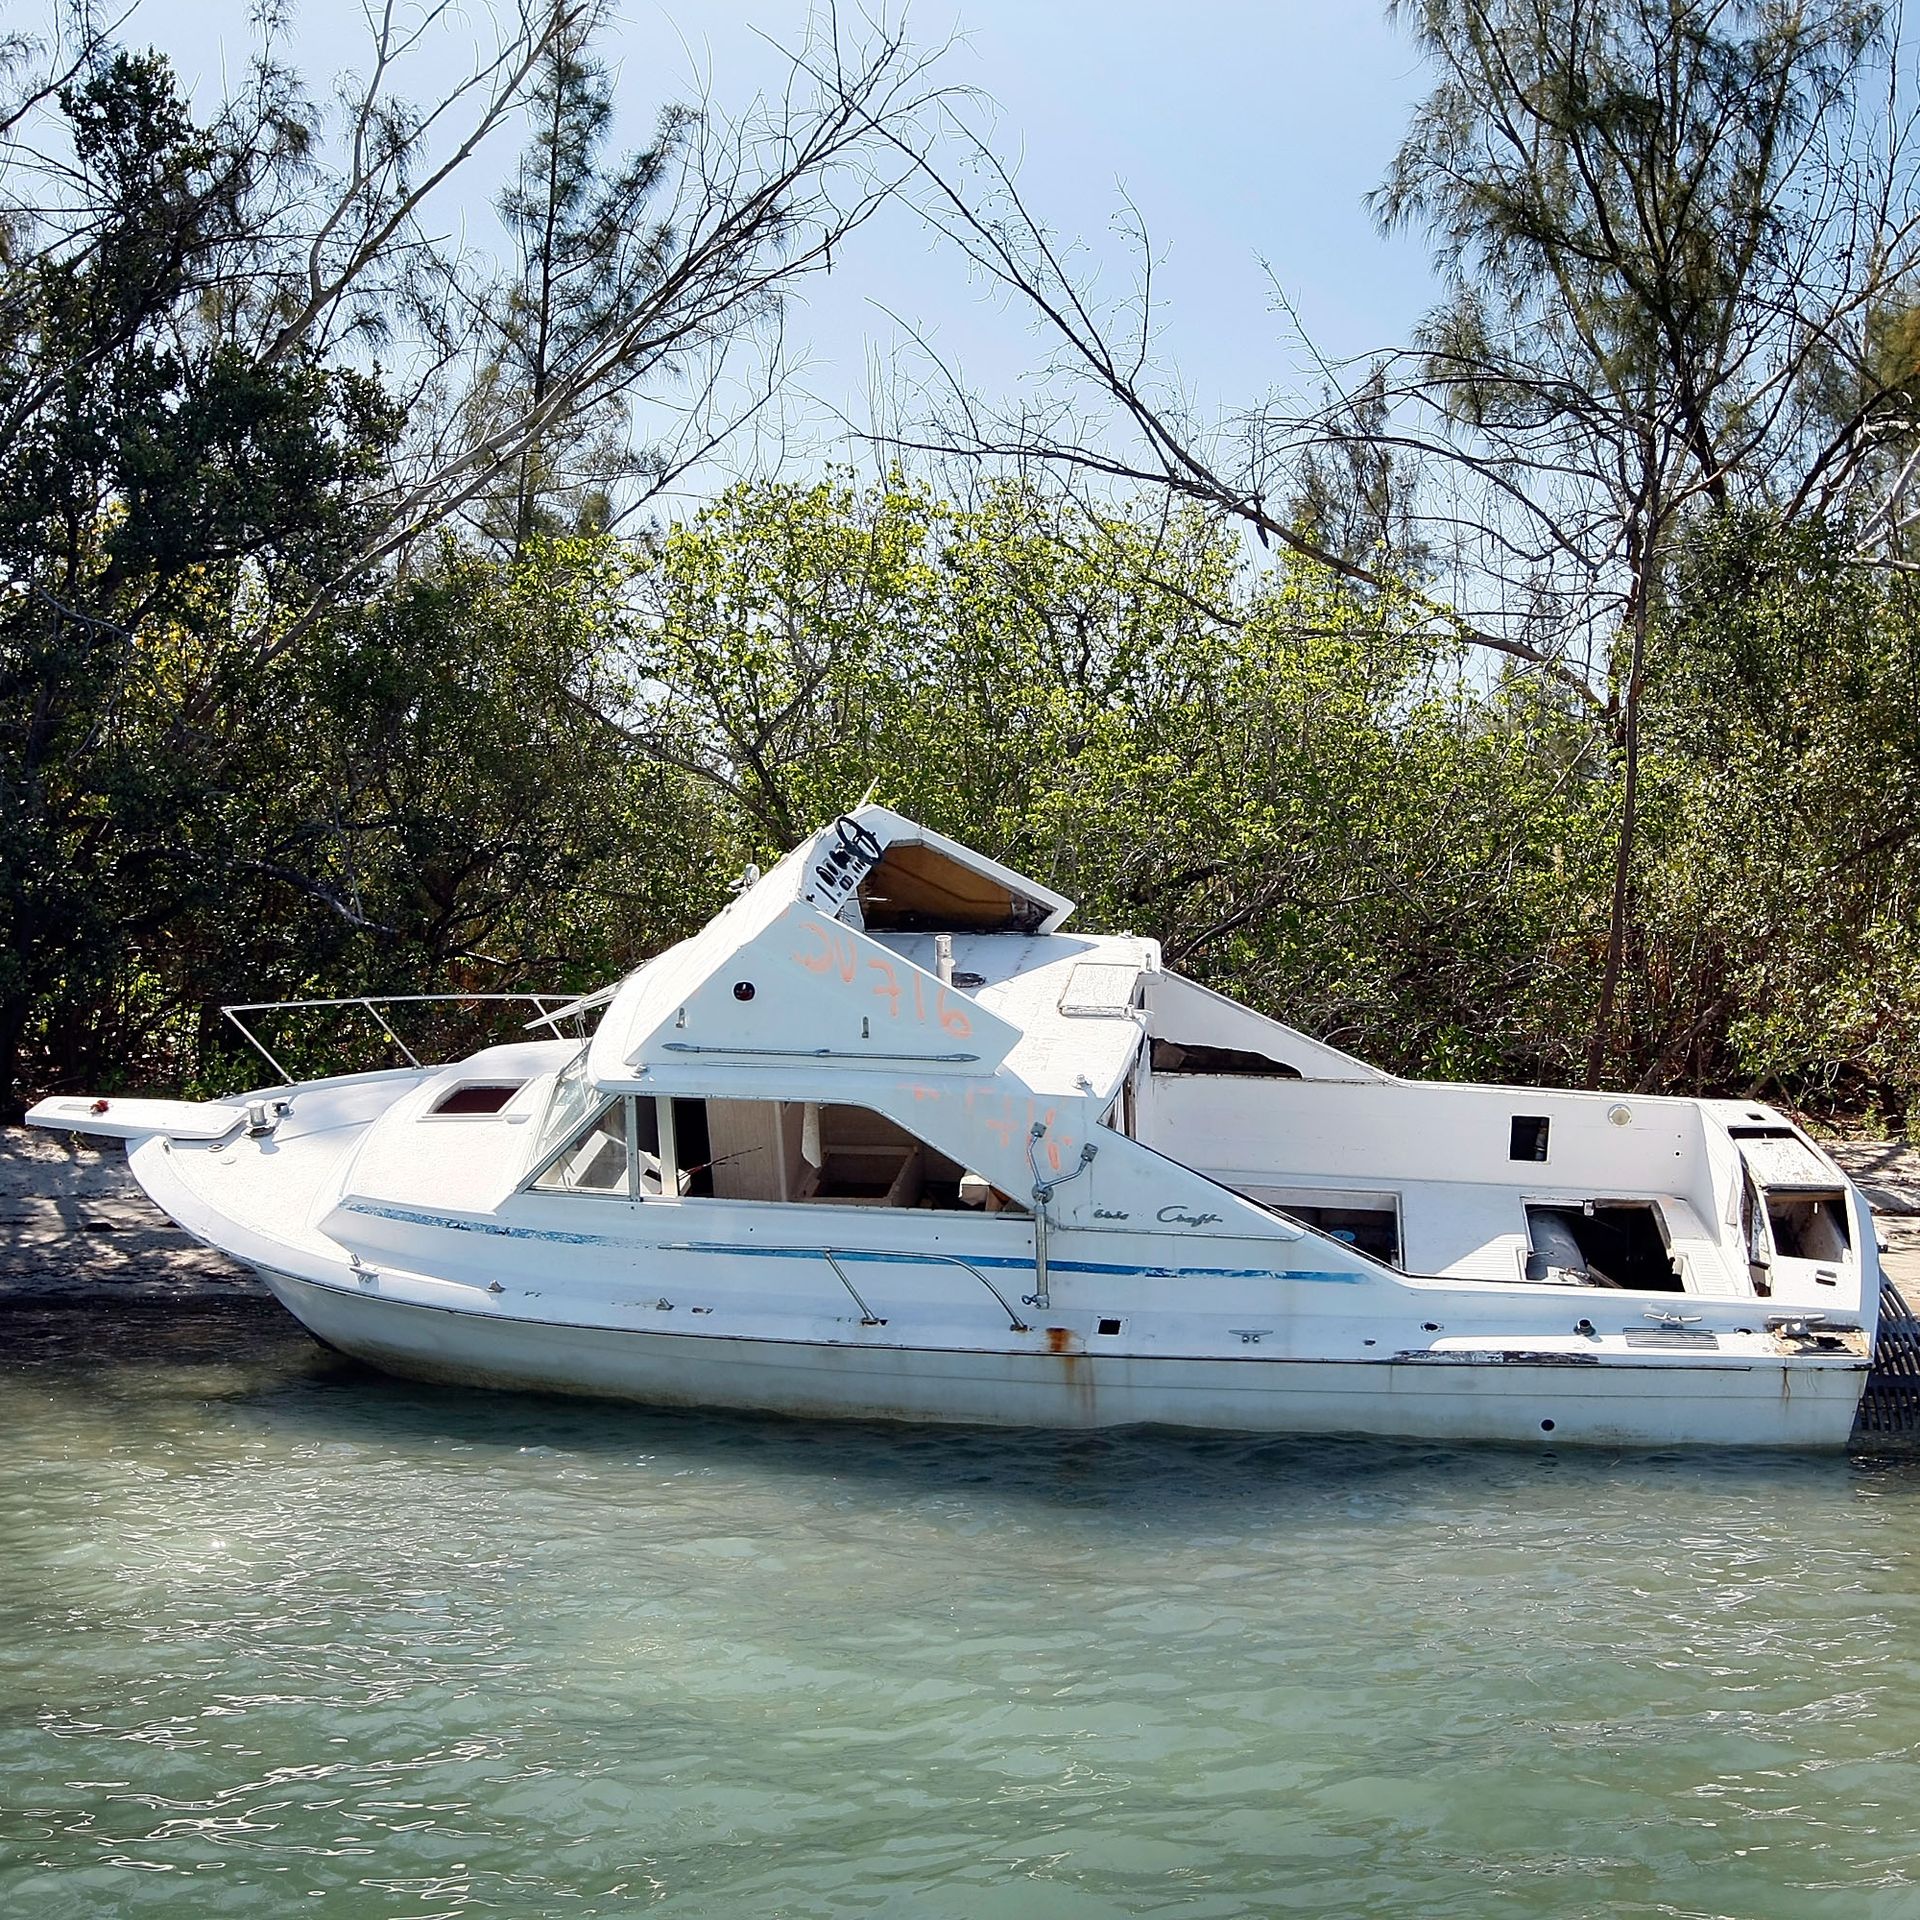 A derelict boat washed up on shore in Miami. 